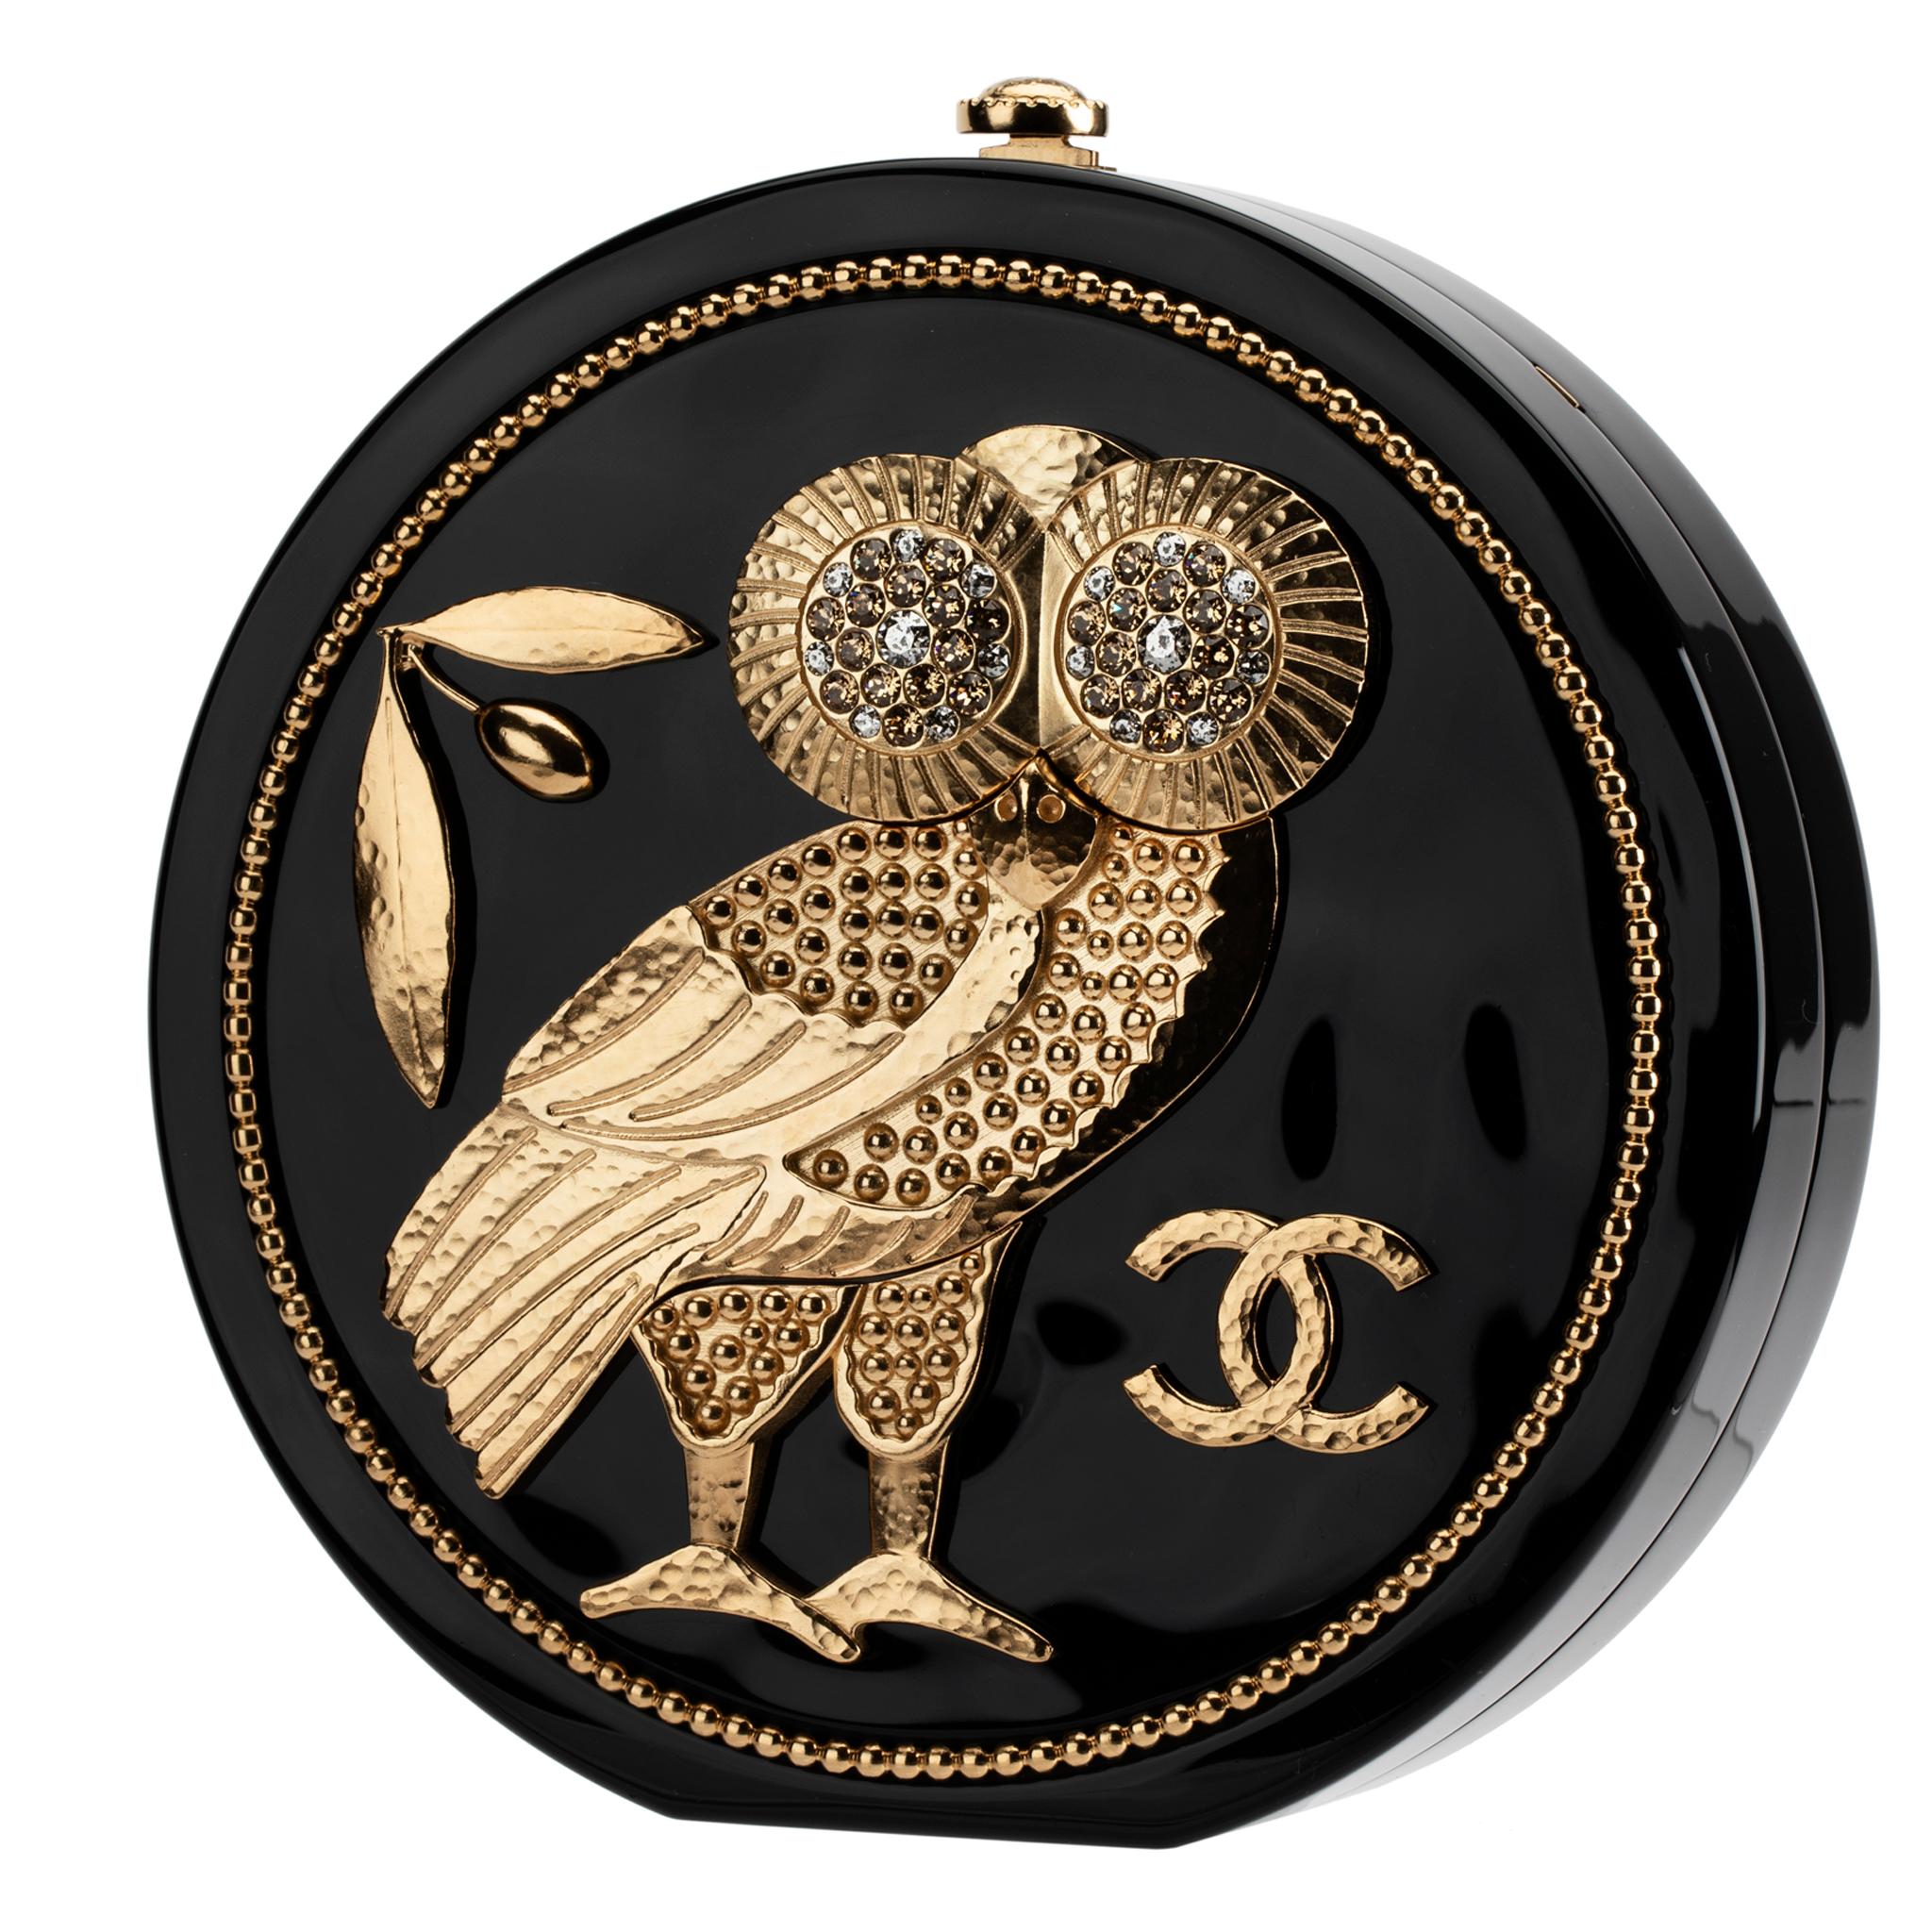 This limited edition Chanel Cruise Owl minaudière made its debut at the Chanel Cruise 2017-18 Runway Collection. Due to its rarity, this evening bag is highly sought after by collectors. This stunning edition features an owl, symbolic of wisdom and